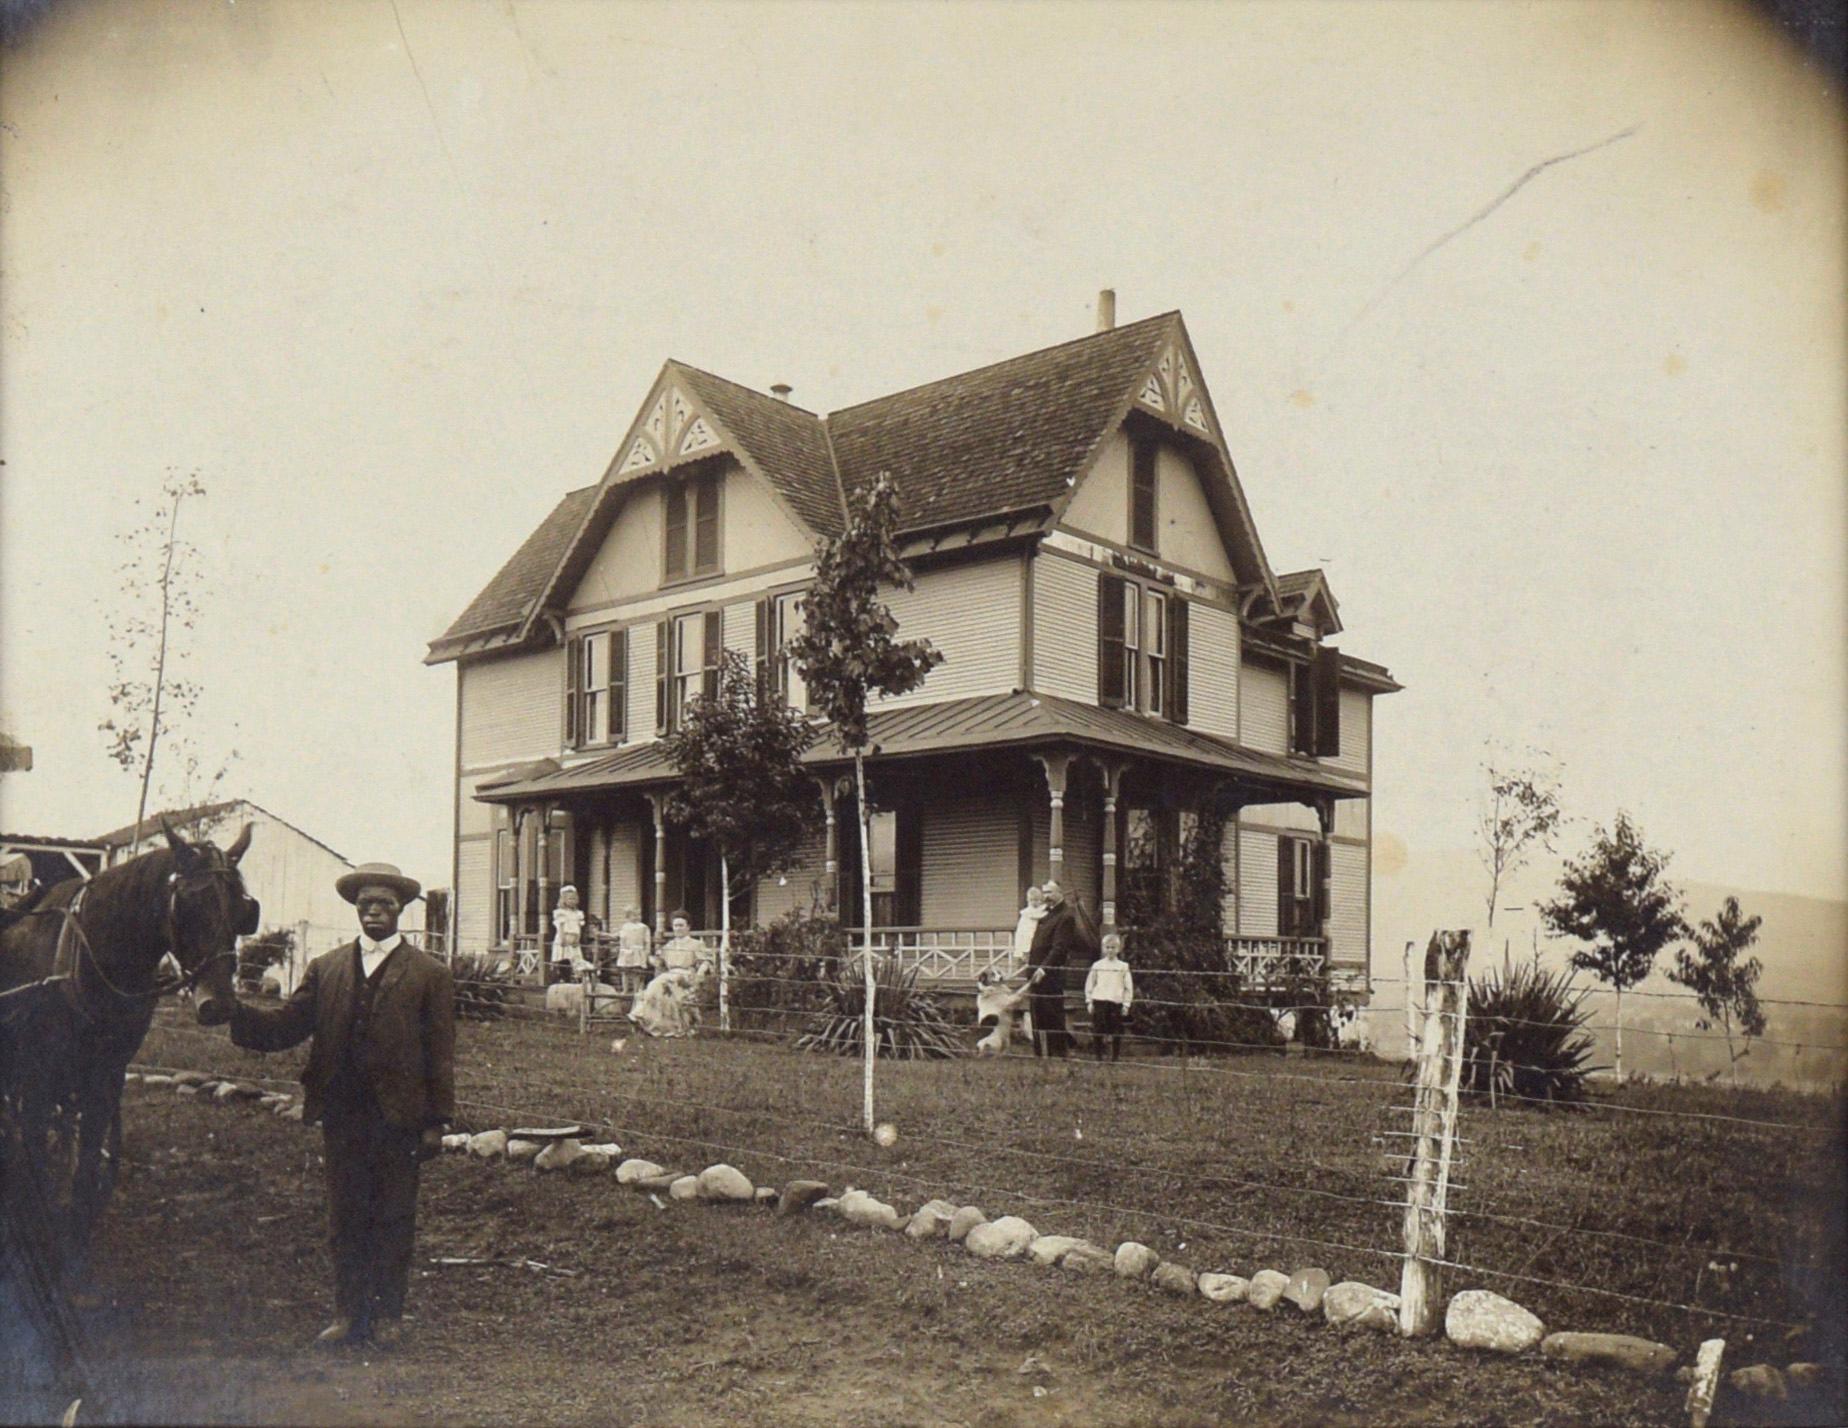 Home of Colonel William H. Terrill Roanoke Virginia Original Photograph

Home of the Colonel William Terrill (CSA) Roanoke Virginia, original period silver gelatin photograph by unknown photographer. Possibly his son and family in this photograph;